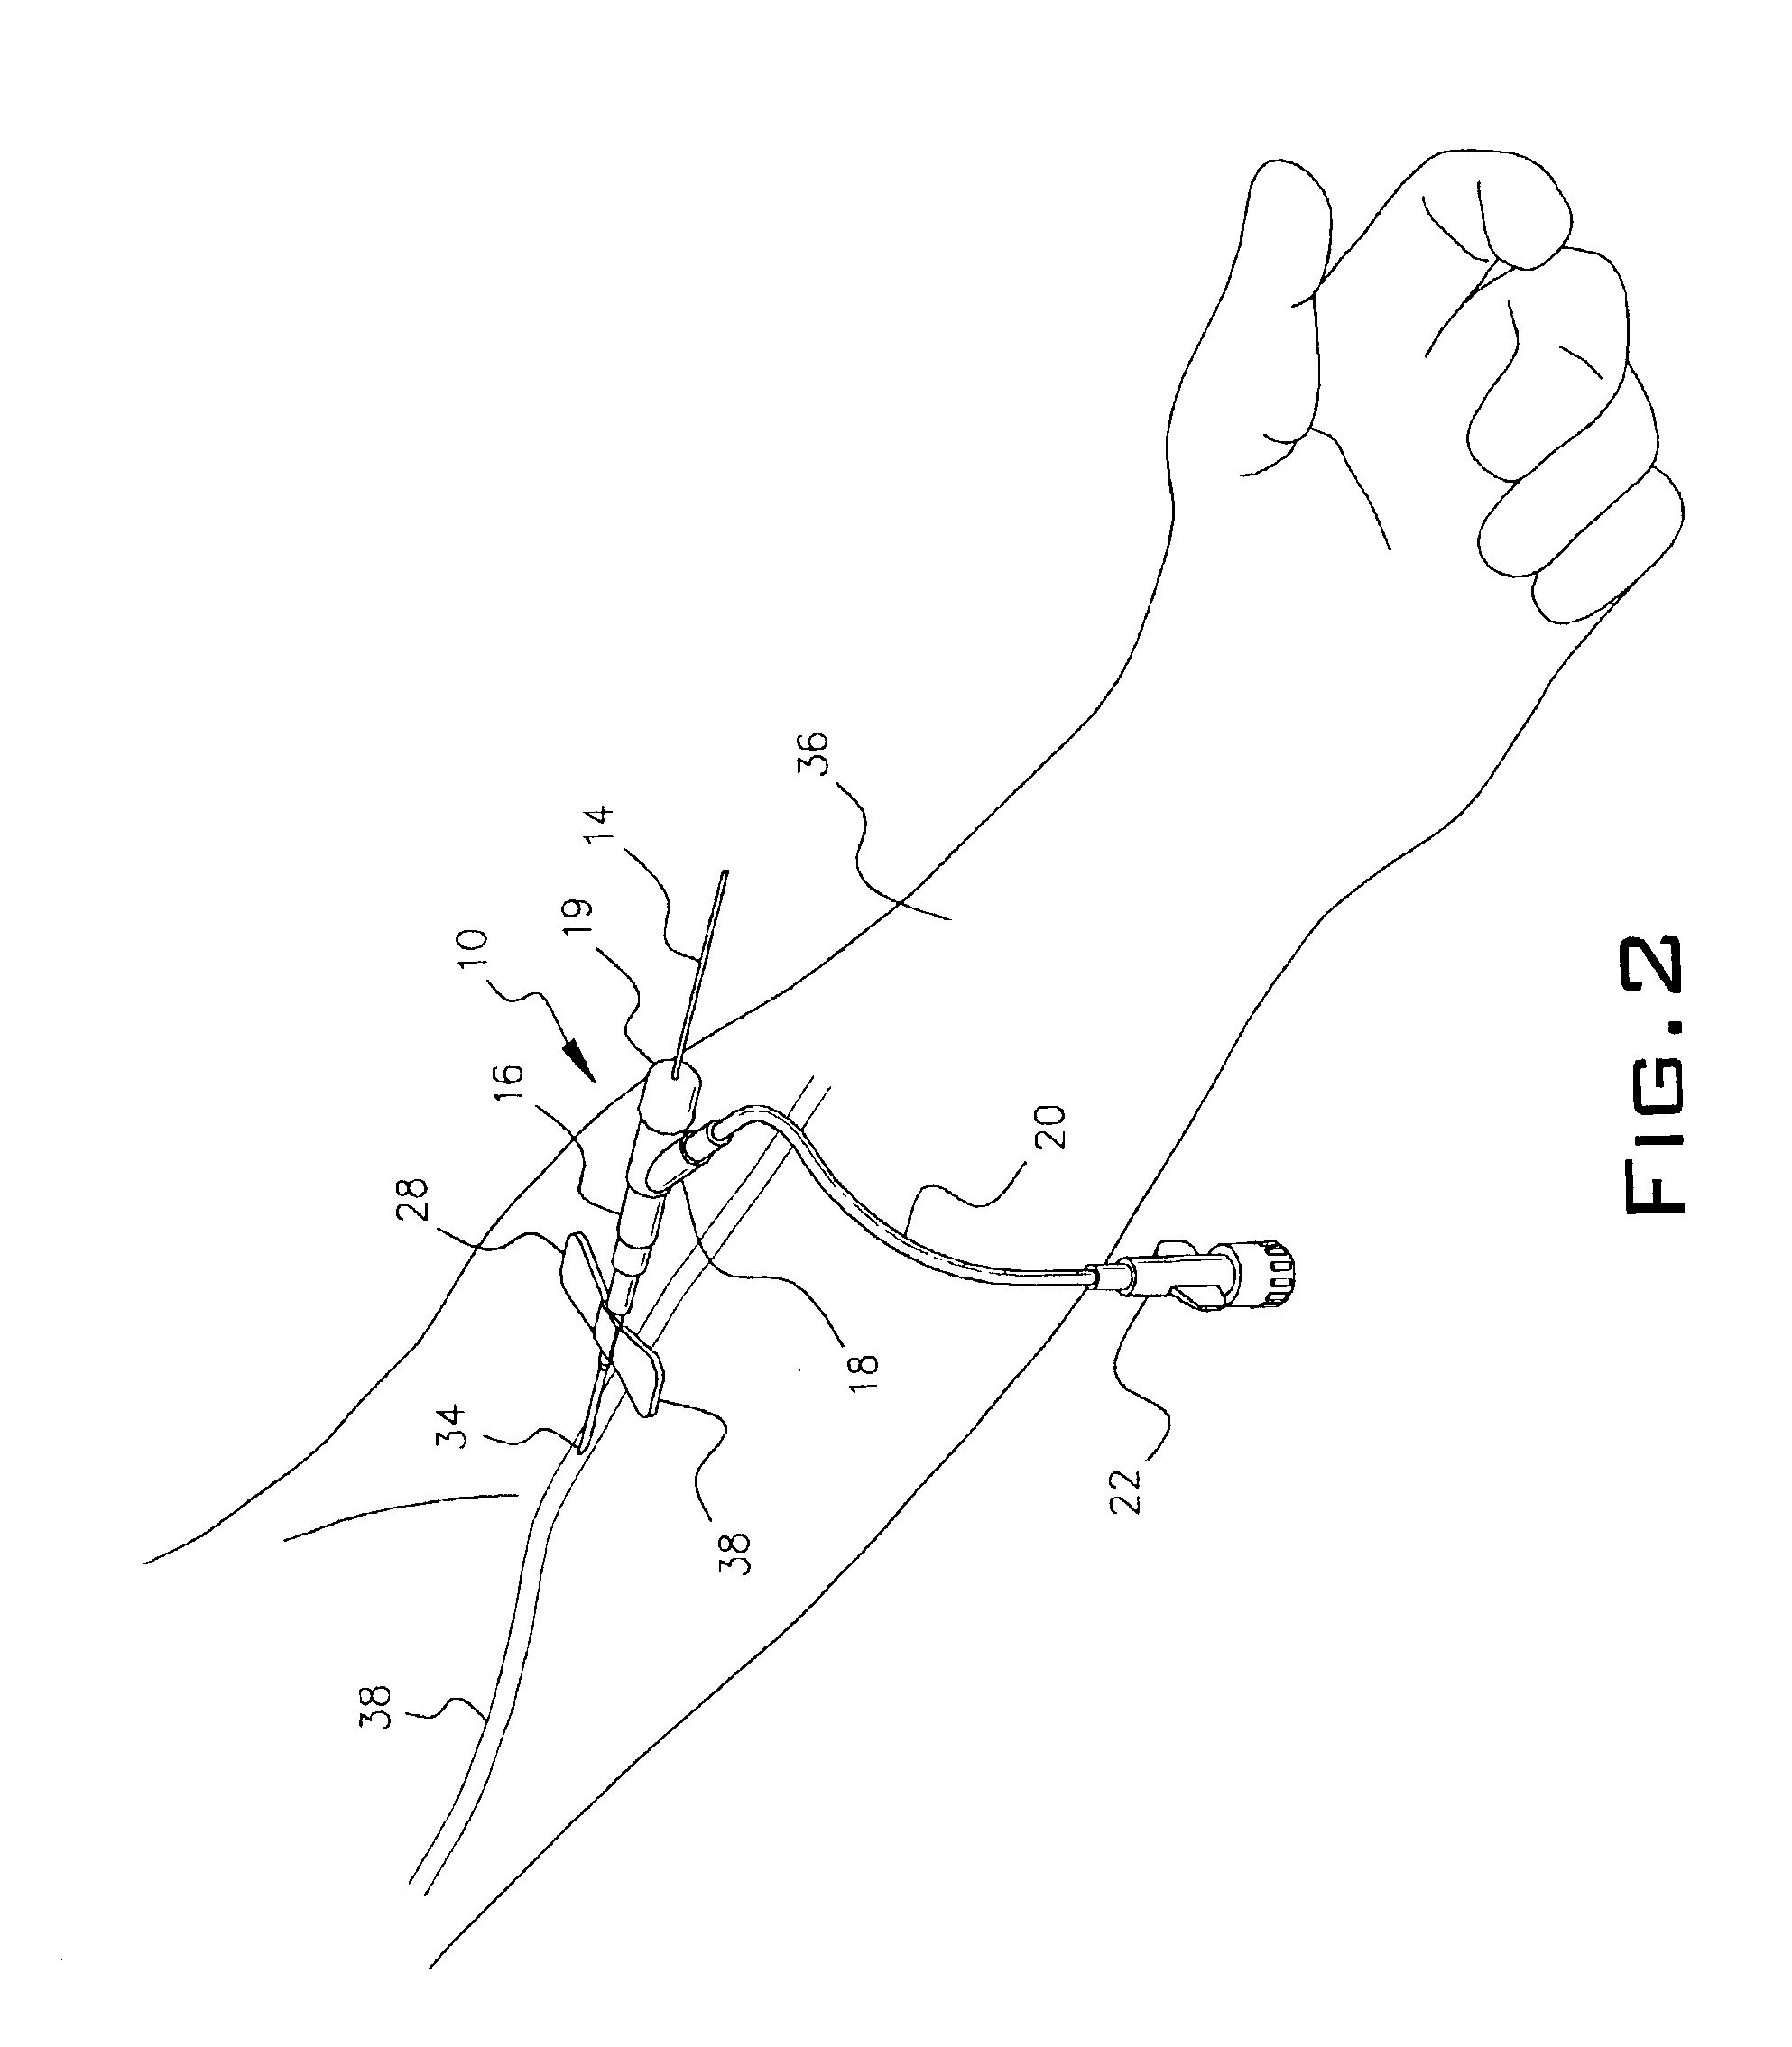 Apparatus for conveying a light source to an intravenous needle to kill blood pathogens